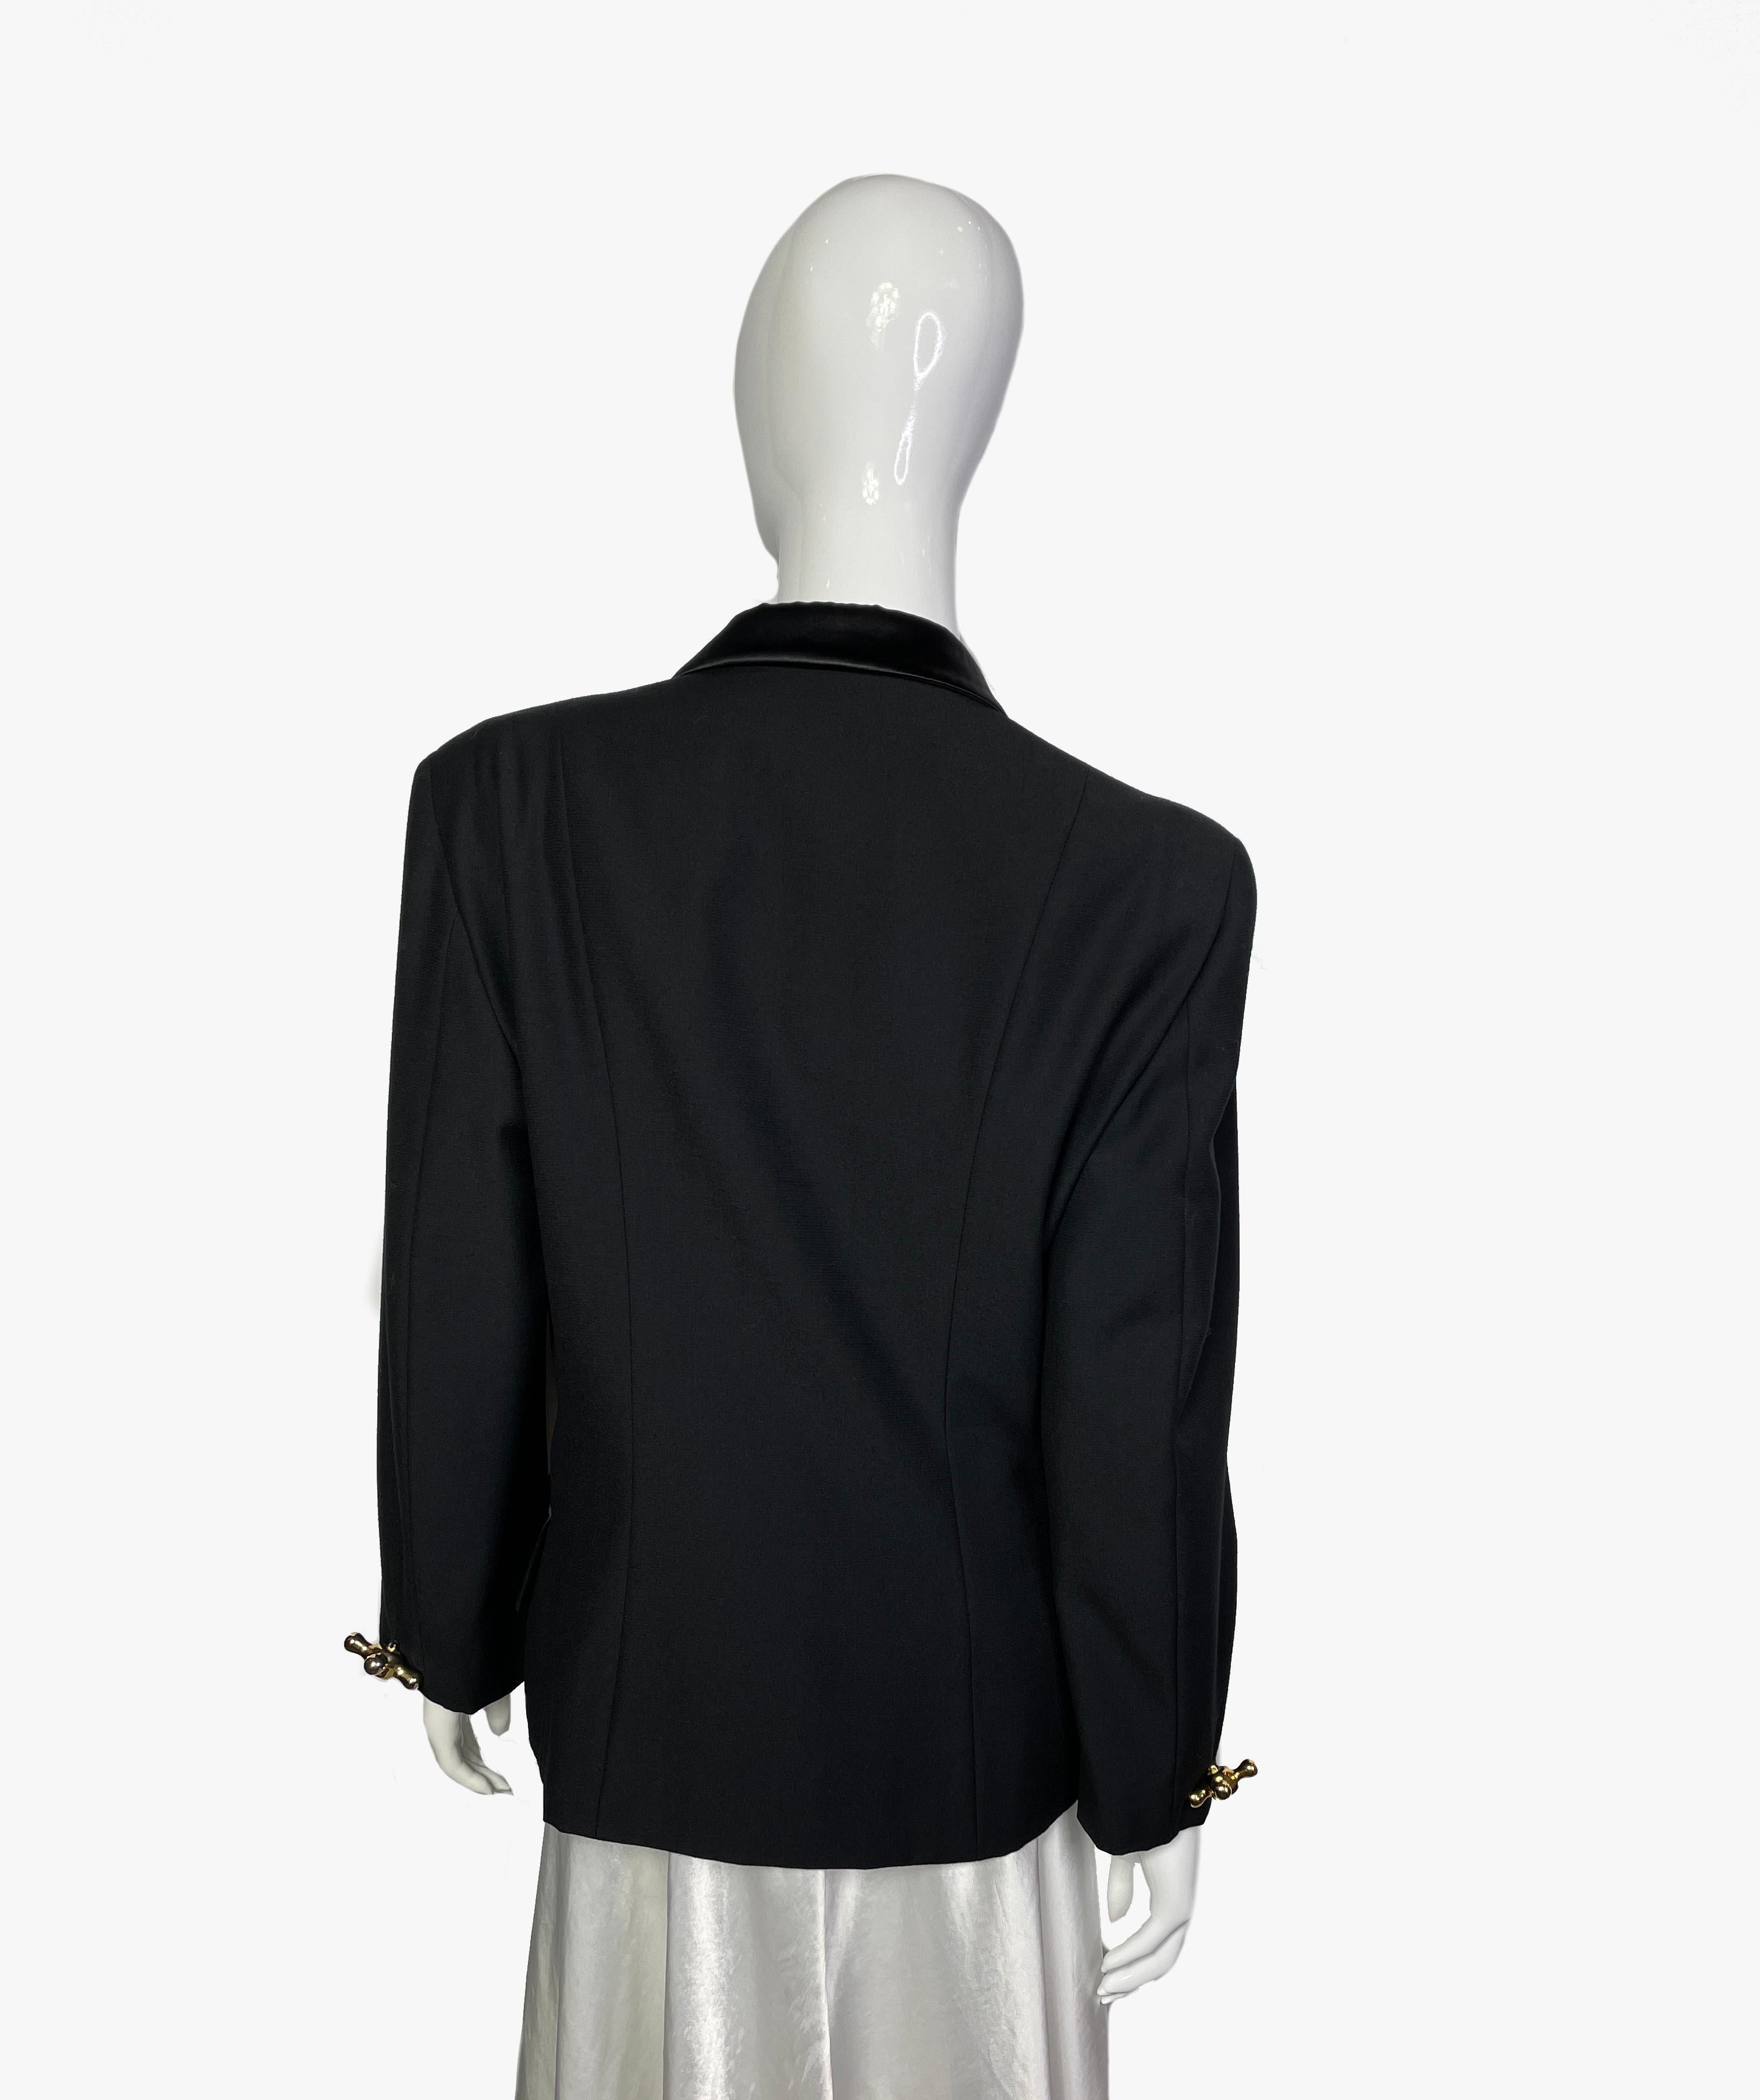 Moschino Vintage Faucet Buttons Black Blazer, 1990s 3